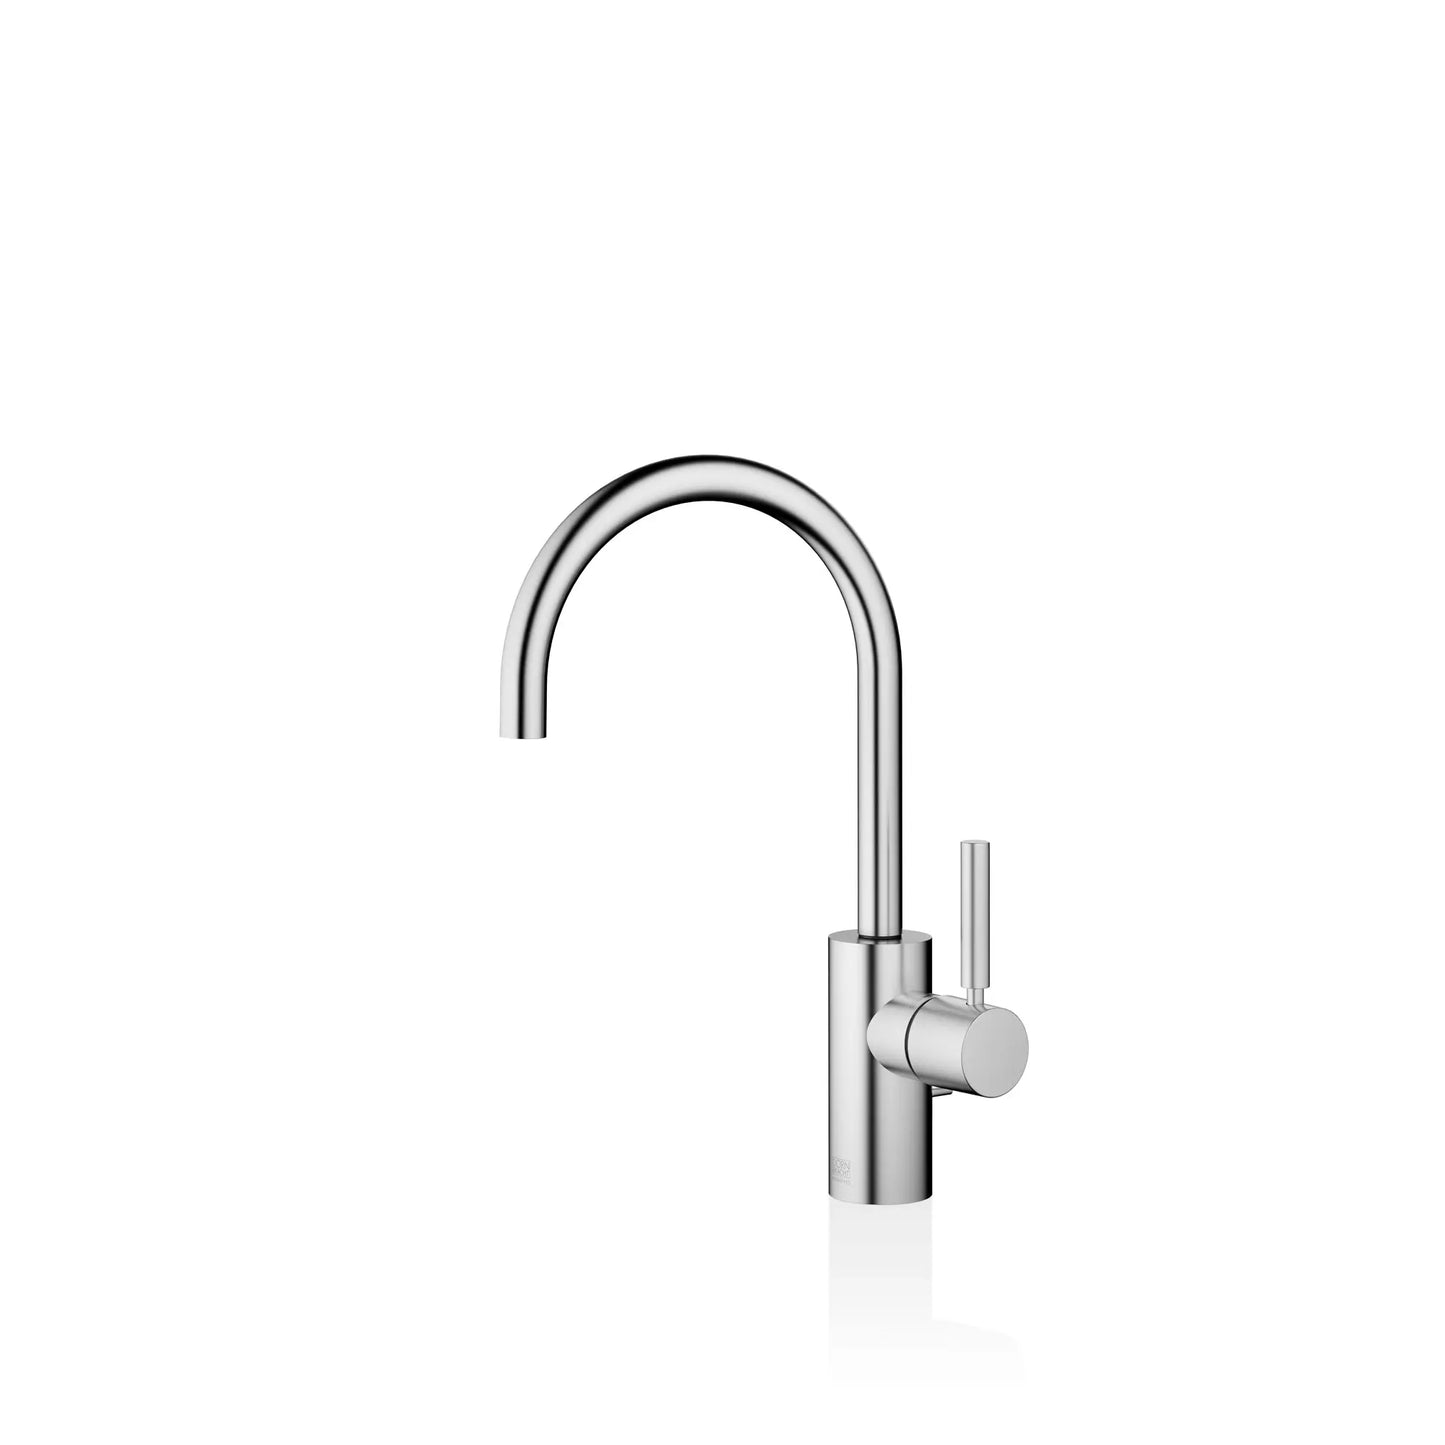 META Single-lever basin mixer with pop-up waste